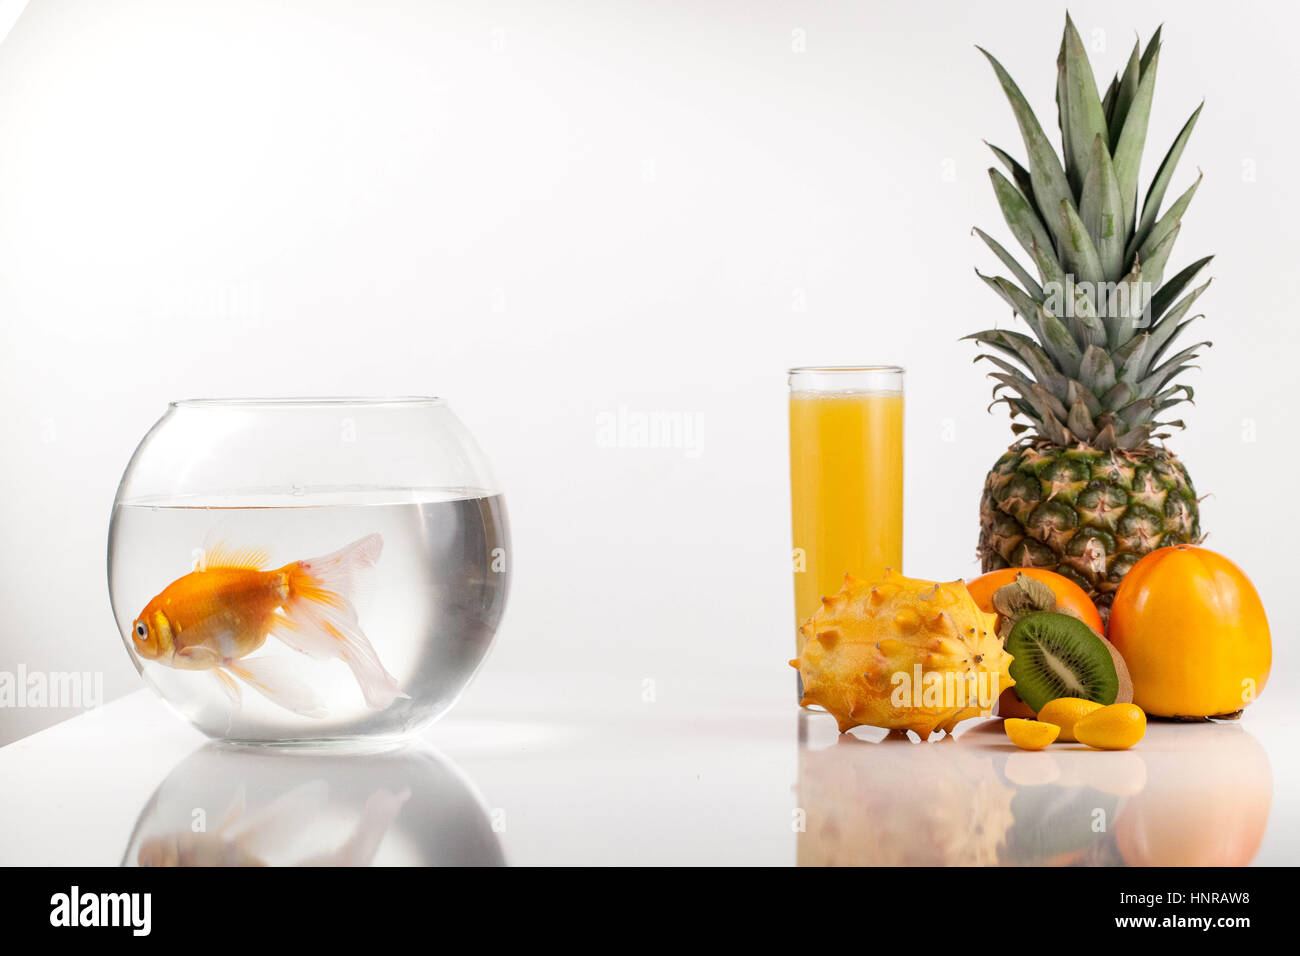 Tropical fruits and aquarium with golden fish. COmposition on a white background Stock Photo